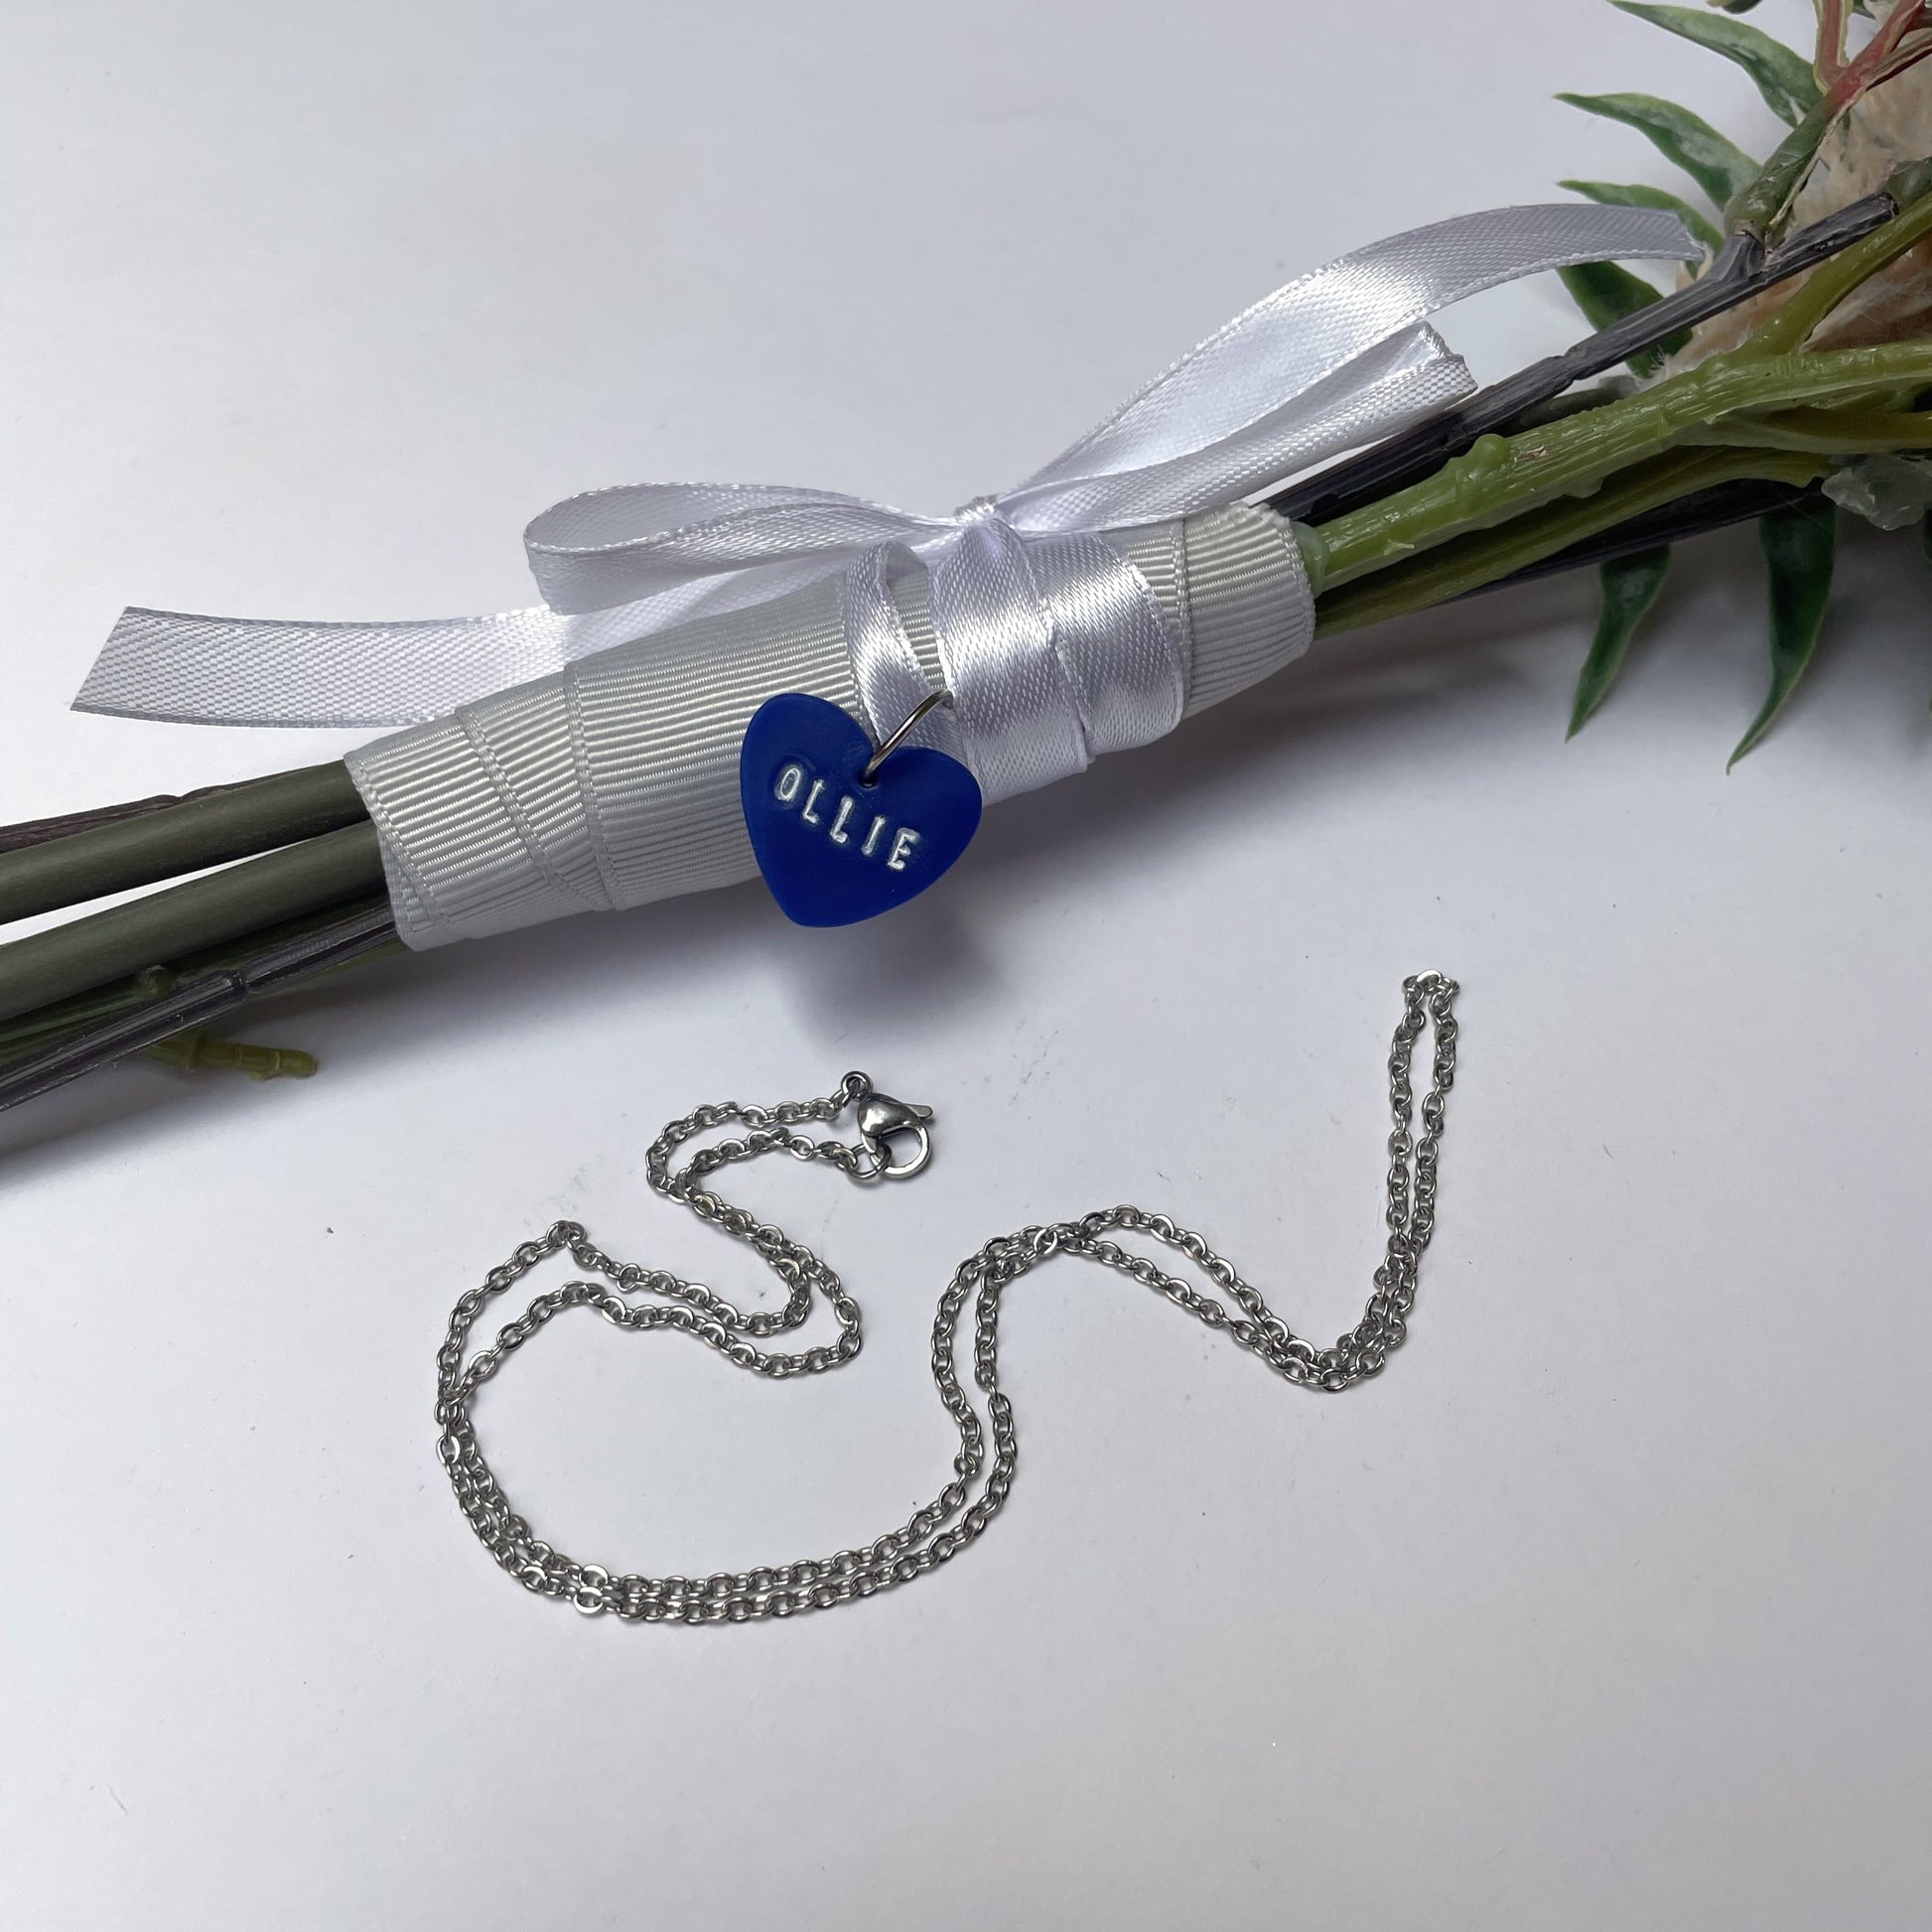 Blue heart handmade bouquet pendant with name 'ollie' in white. In the foreground is a silver necklace chain.